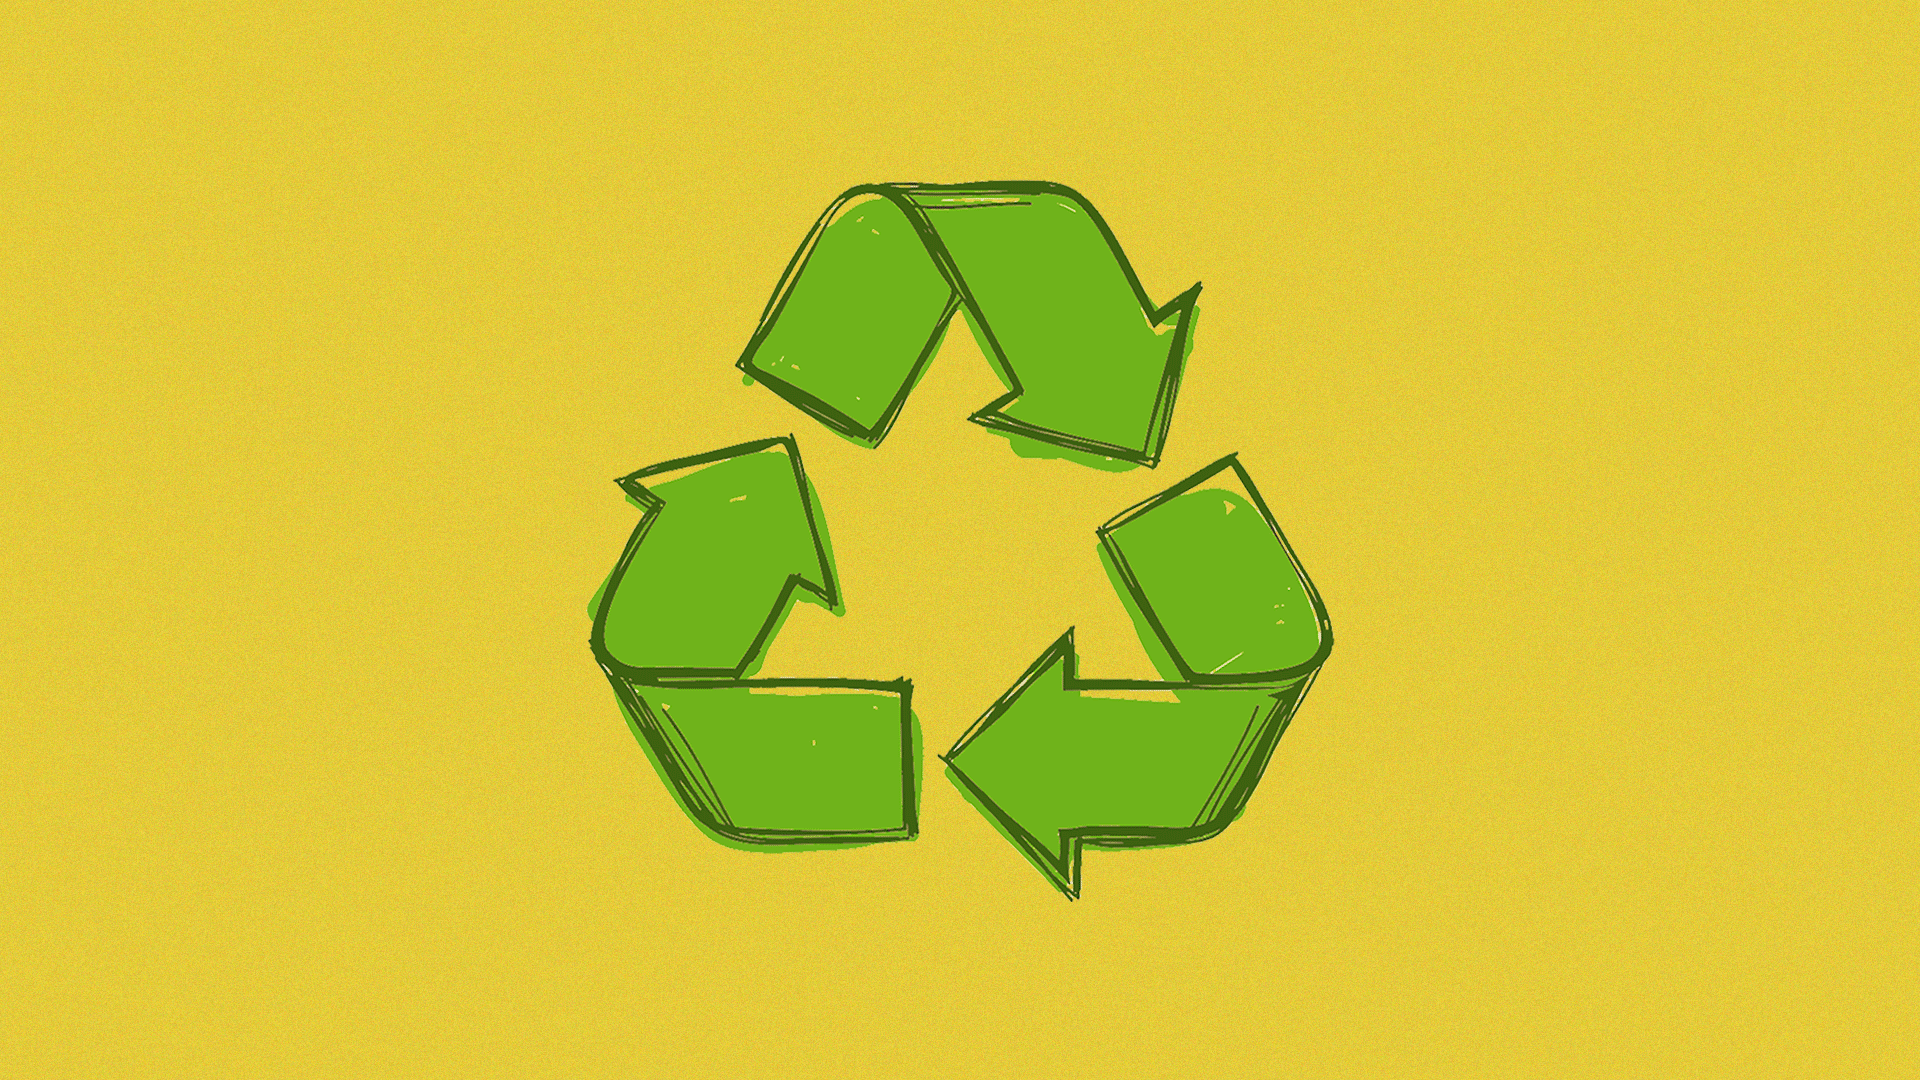 Animated illustration of a hand drawn recycling symbol changing to a flat recycling symbol, and then to a 3d recycling symbol.